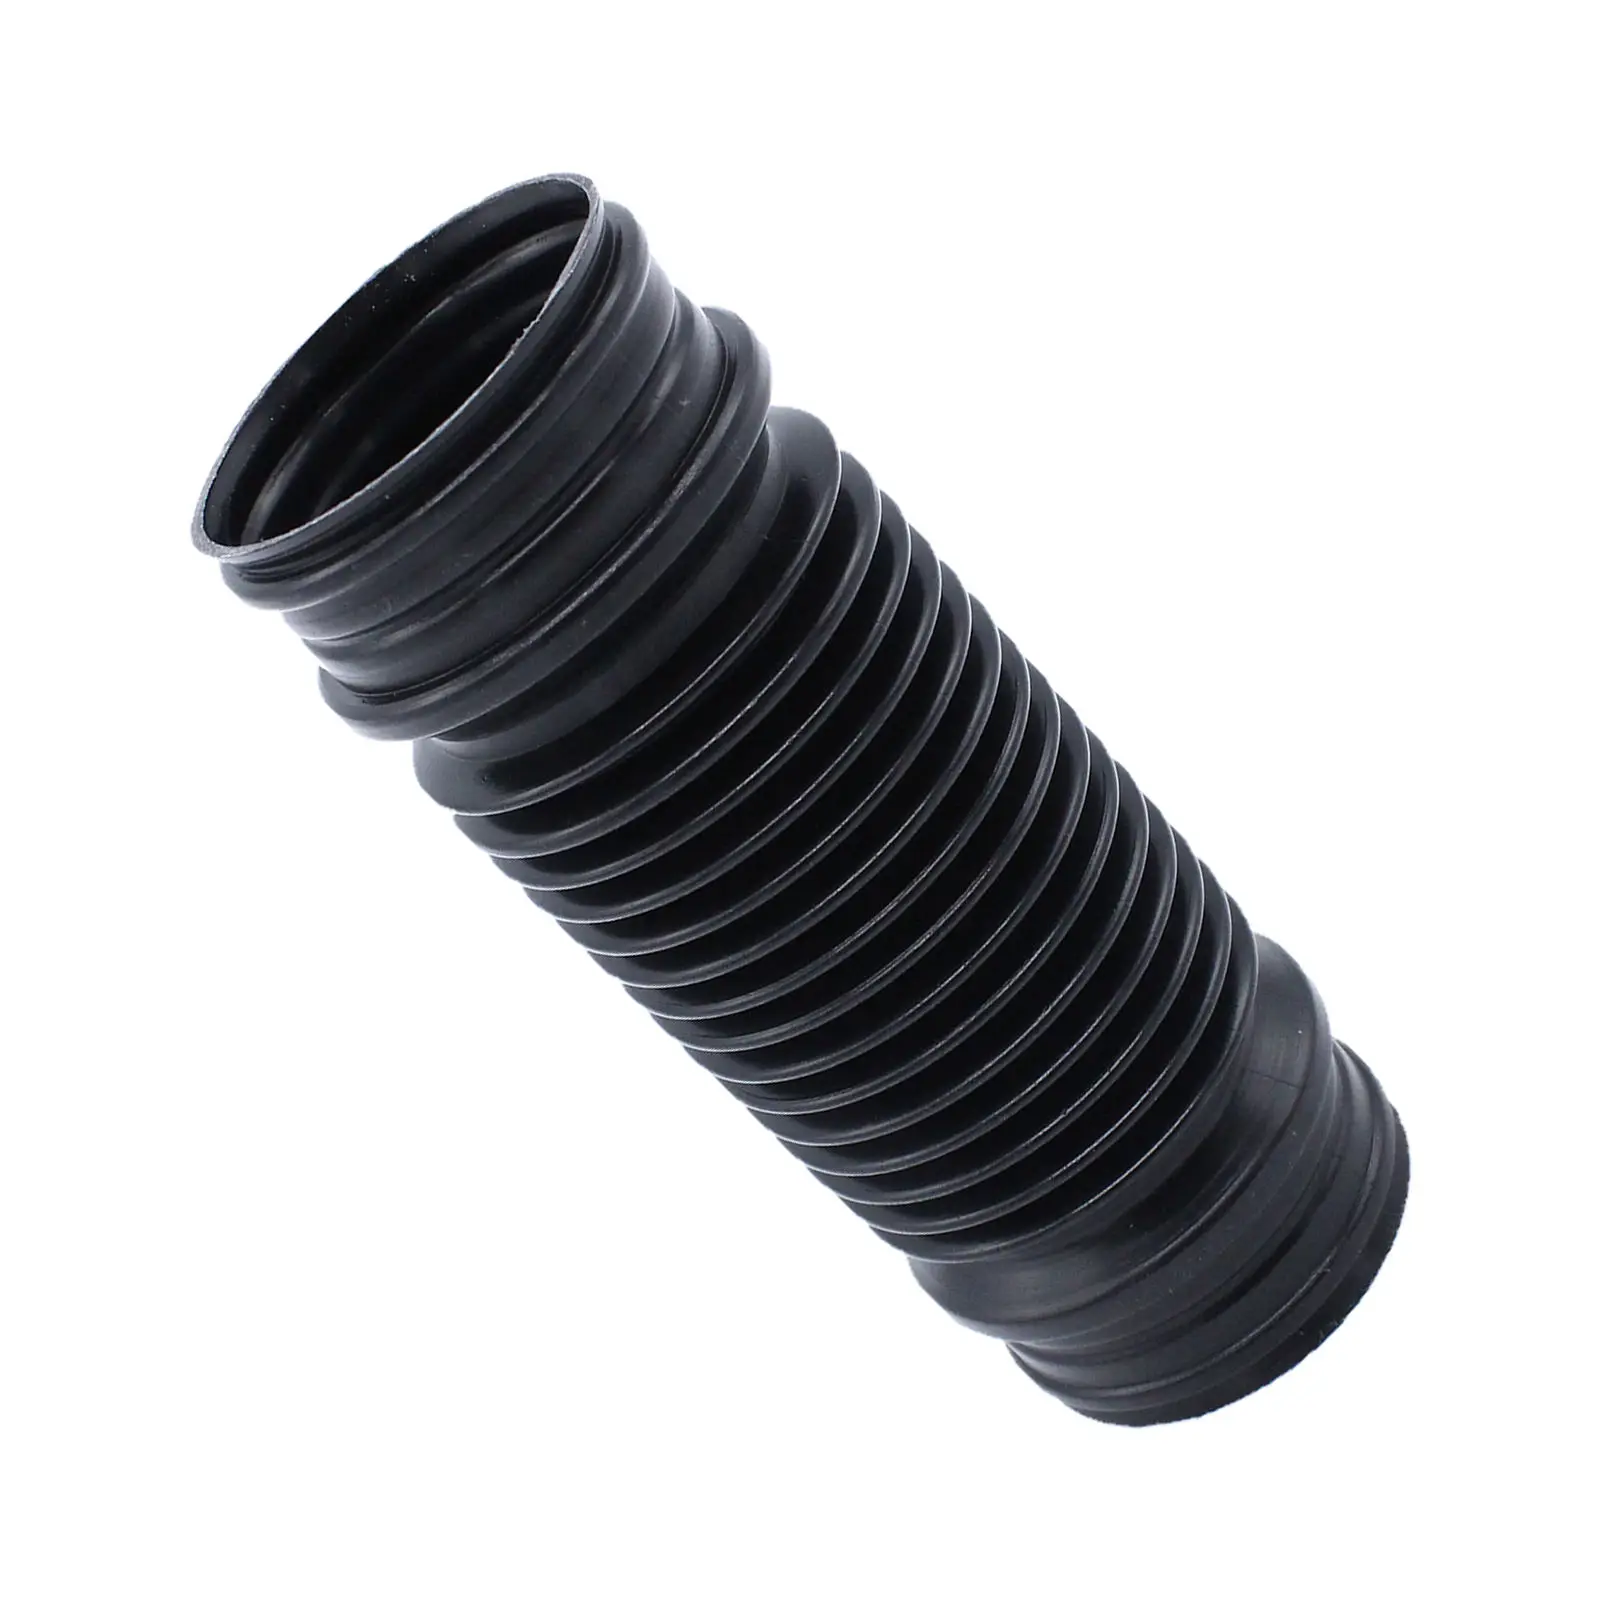 Intake Control Air Hose Pipe 1J0129618B Fit for VW Golf 98-06 Air Intake Tube Cleaner Hose Replace